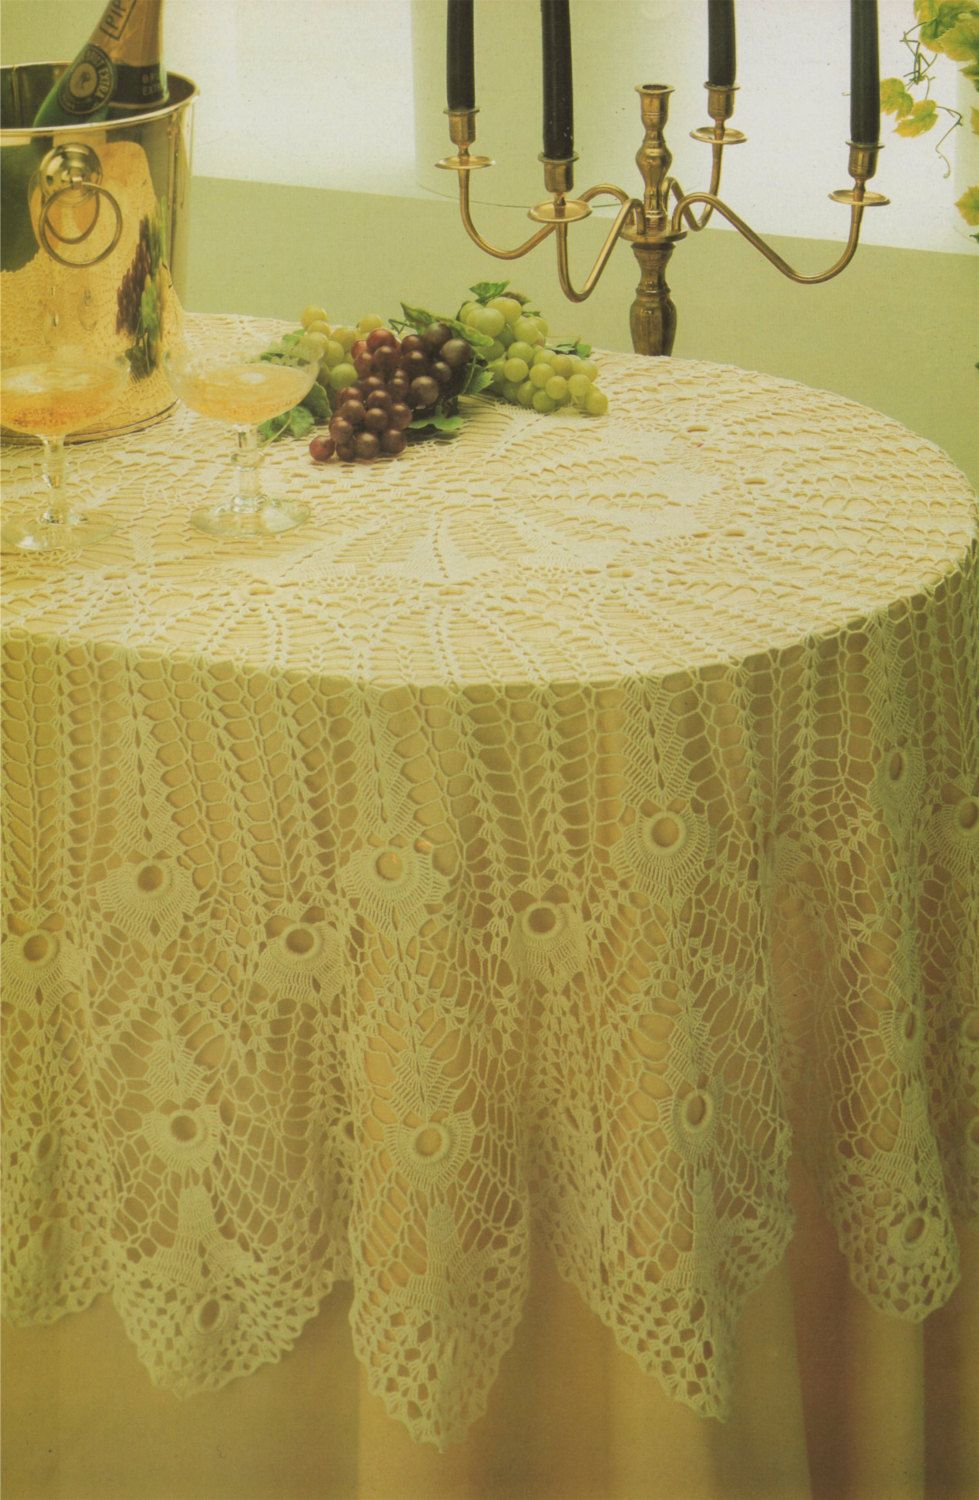 Free Crochet Oval Tablecloth Patterns Oval Tablecloth Crochet Pattern Pdf Table Cloth Table Cover Table